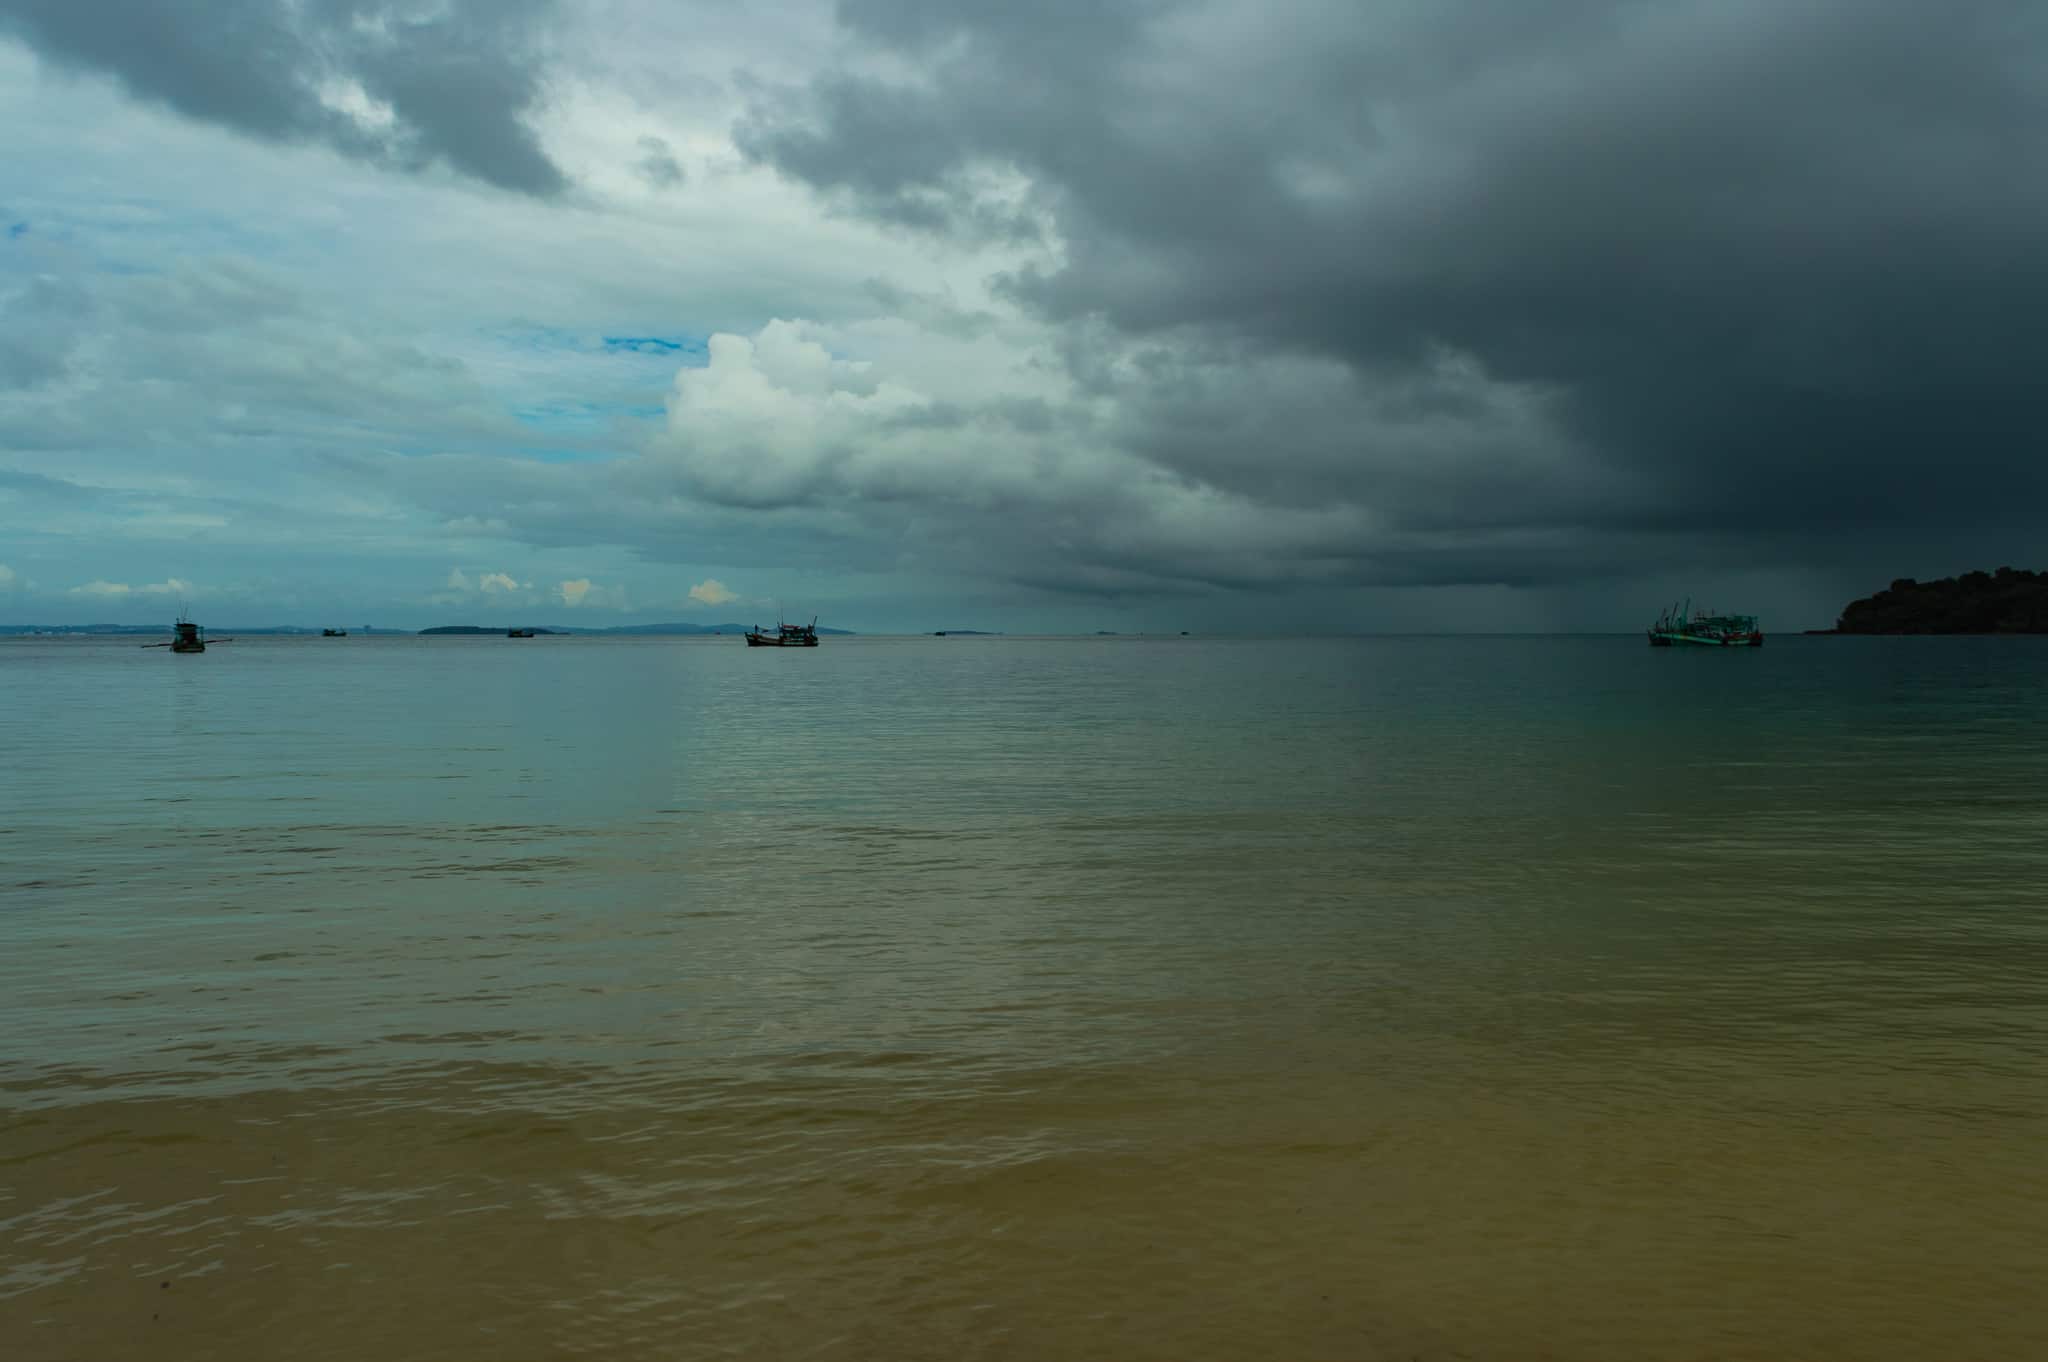 A monsoon storm approaches off the coast of Koh Rong Sanloem Island, Cambodia